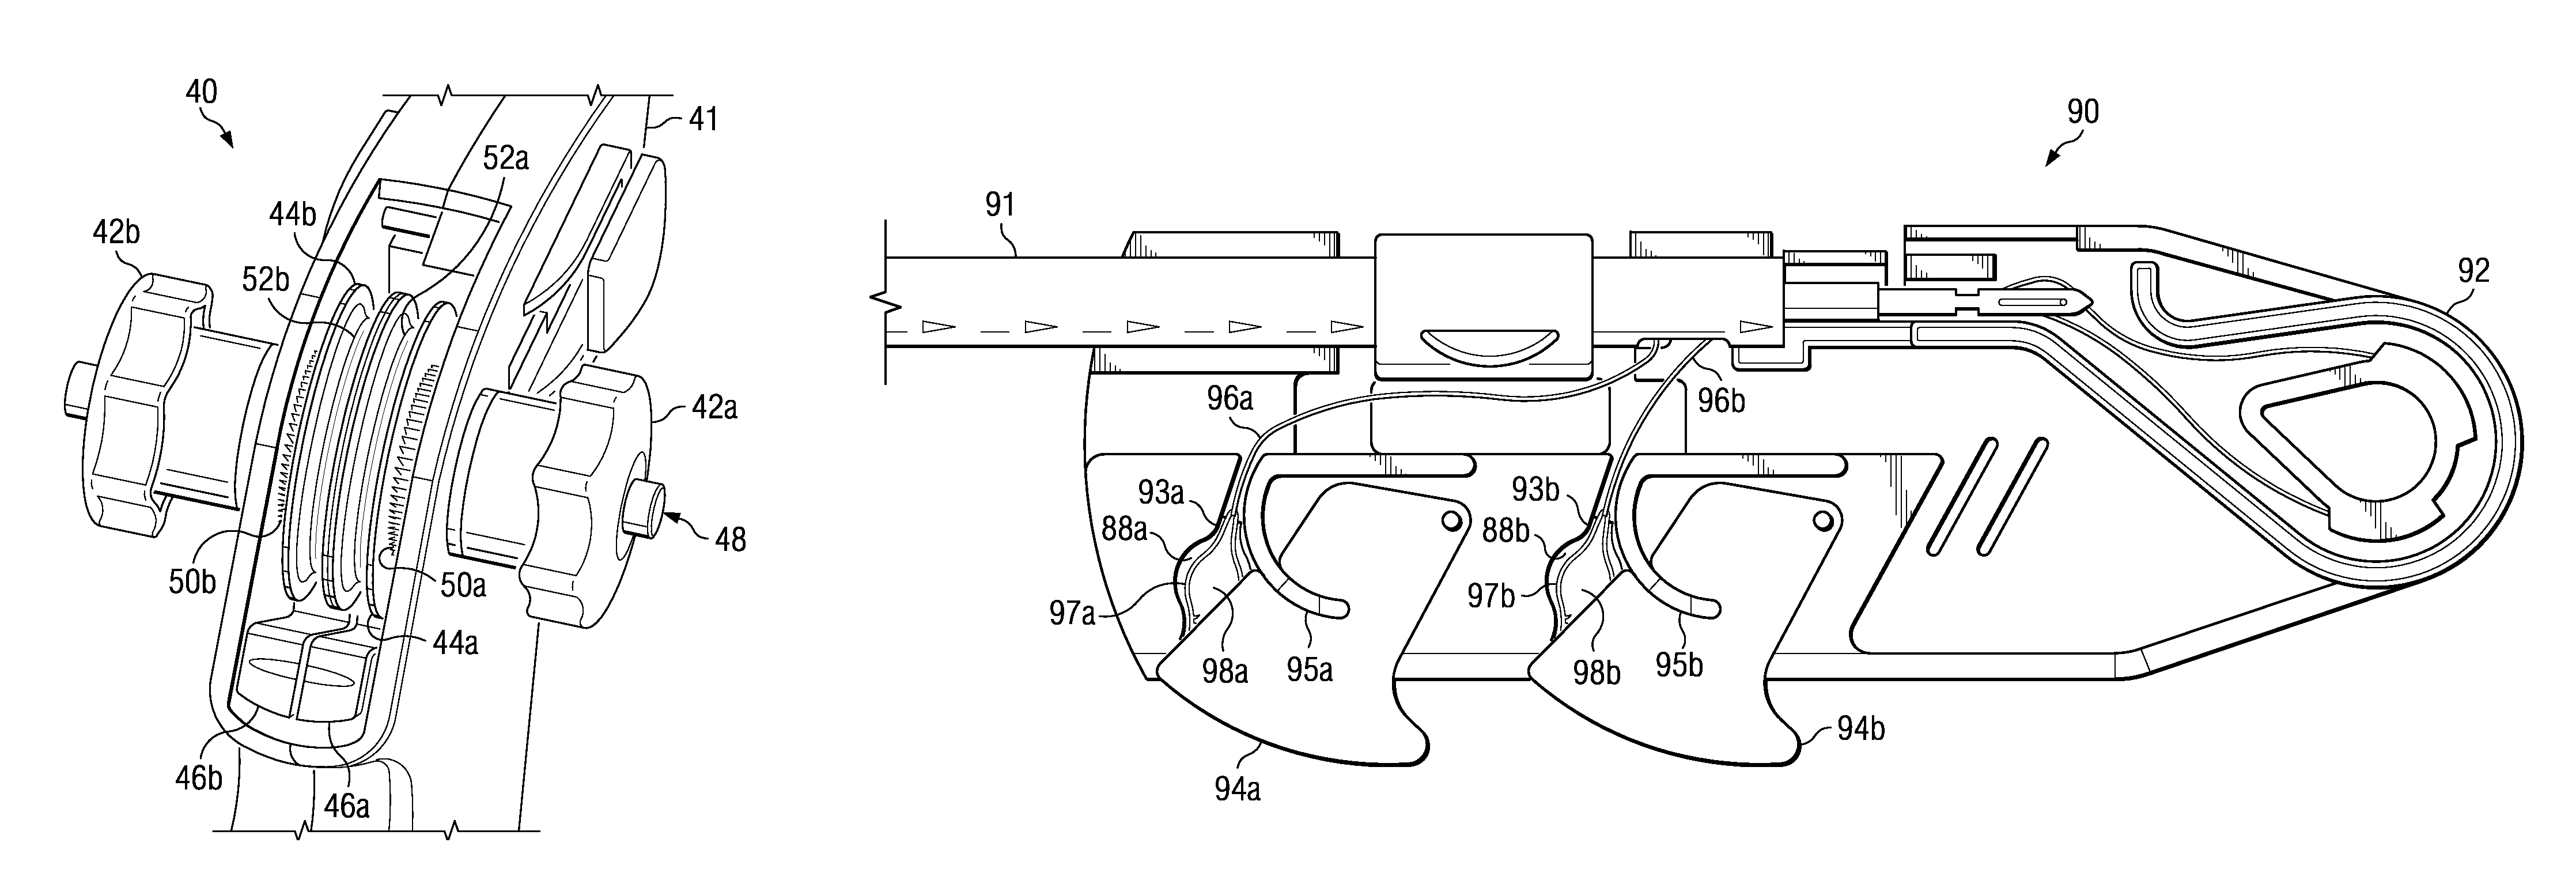 Independent suture tensioning and snaring apparatus